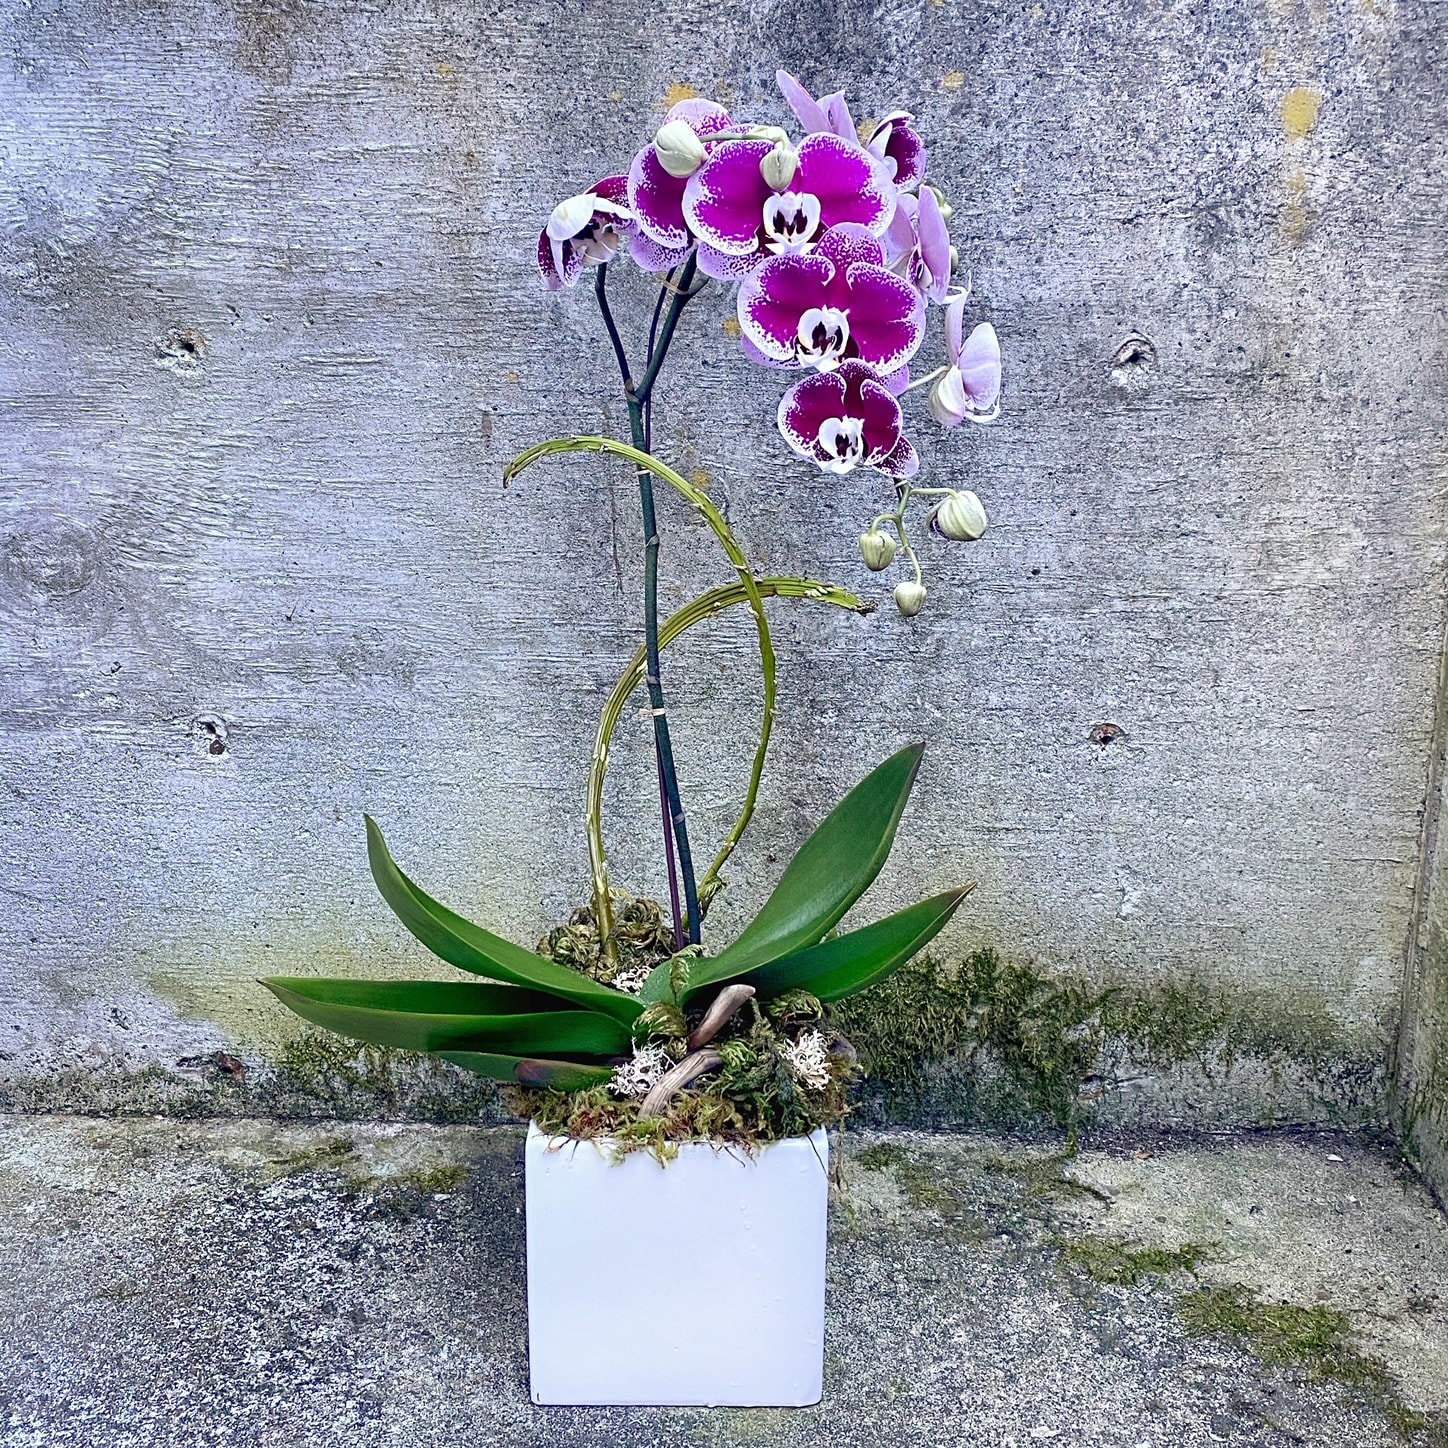 Color Phalaenopsis Orchid Plant - A lush single-stem Phalaenopsis orchid with colorful blooms. Single stem orchid plants covered with blooms. We pot them up in beautiful containers and stage them with branches, moss and textural accents in traditional Fiori Floral Design style. Available in a variety of colors. If you have a specific color preference, please let us know your first and second choice in the &quot;Florist Instructions&quot; on the order form.  All orchid plants are delivered with detailed care instructions to make it easy for the recipient to care for them and to get them to rebloom. Select 'Deluxe' for a beautiful orchid plant accented with green plants in a larger pot. Select 'Premium' for two beautiful orchid plants in the same pot in a larger pot.  All of the plants are approximately 24 to 28 inches tall.